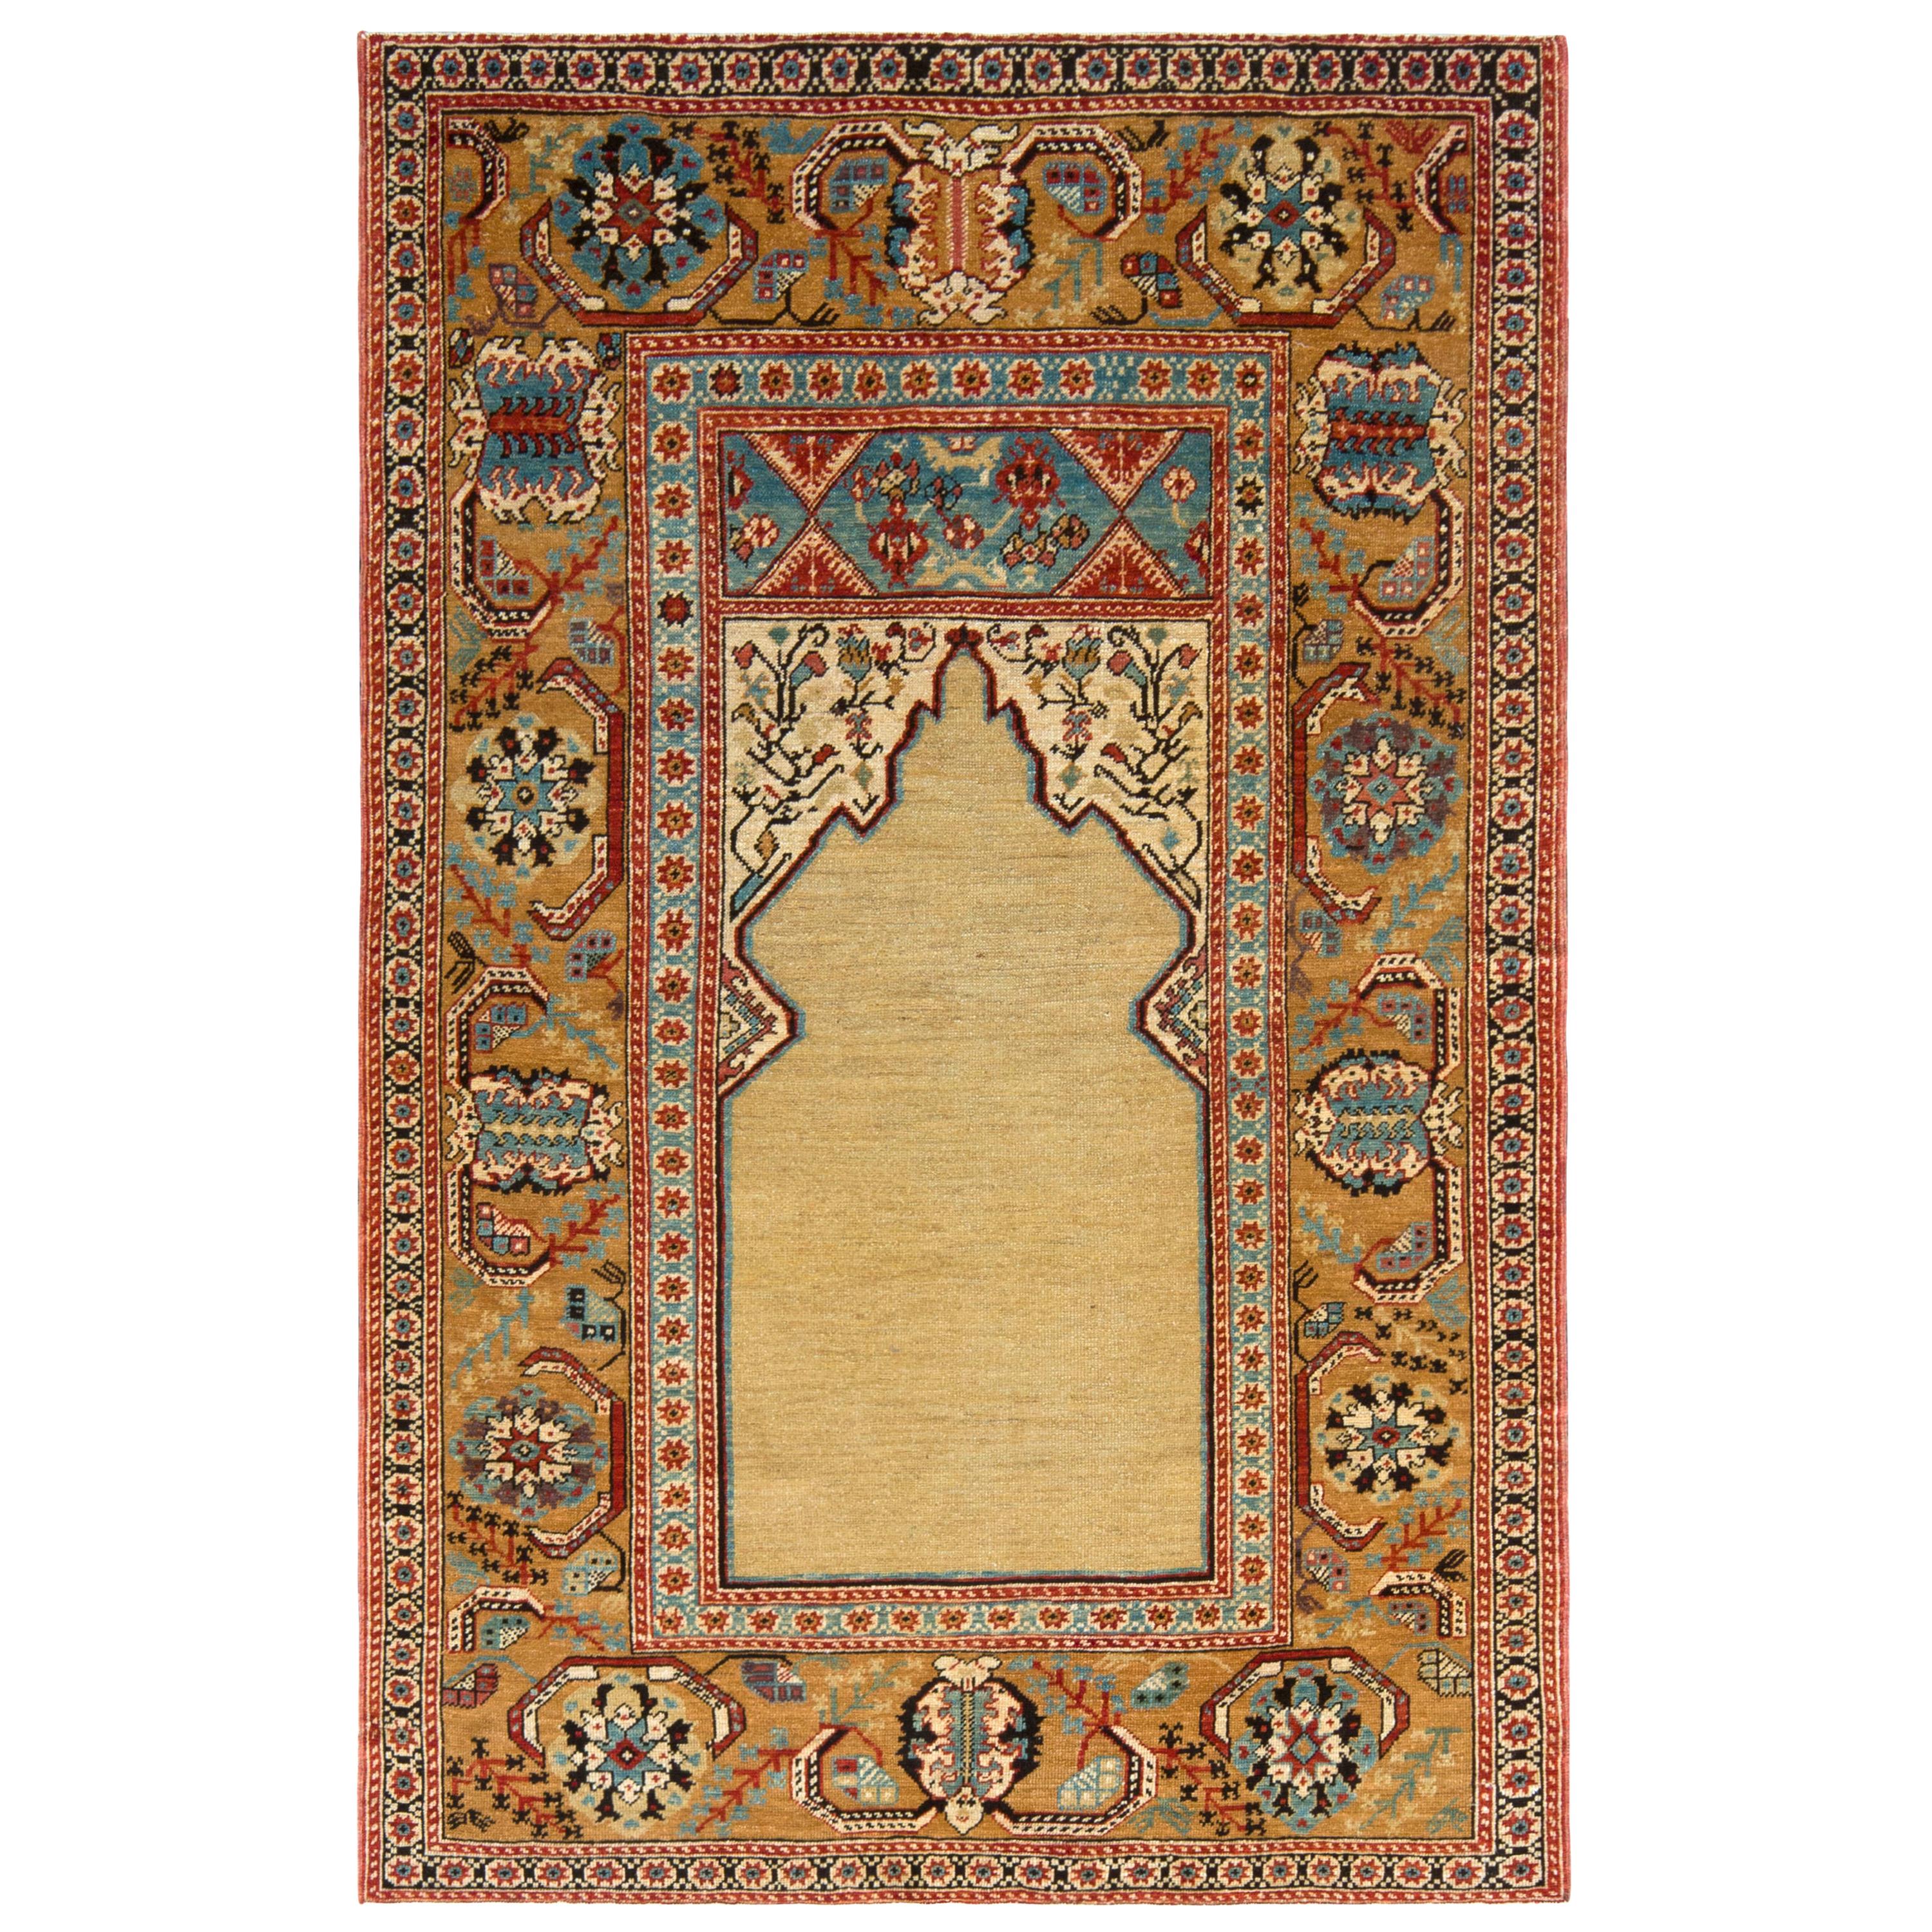 Rug & Kilim’s 19th Century Style Rug in Beige Gold and Blue Floral Pattern